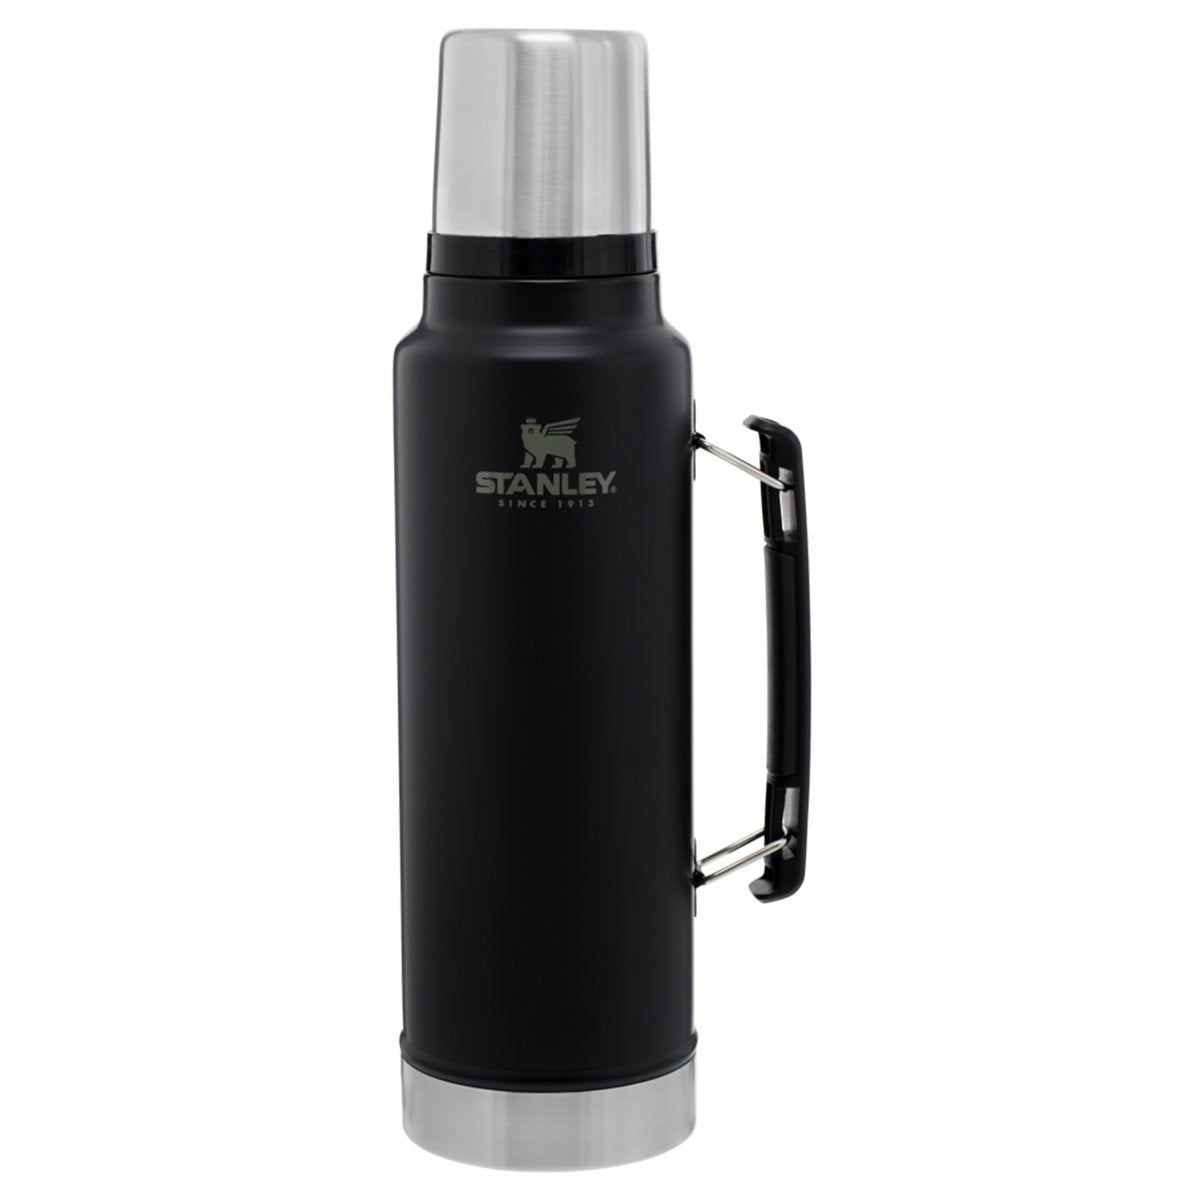 Stanley Thermos Classic Vacuum Insulated Wide Mouth Bottle (1.1 QT, 2 QT)